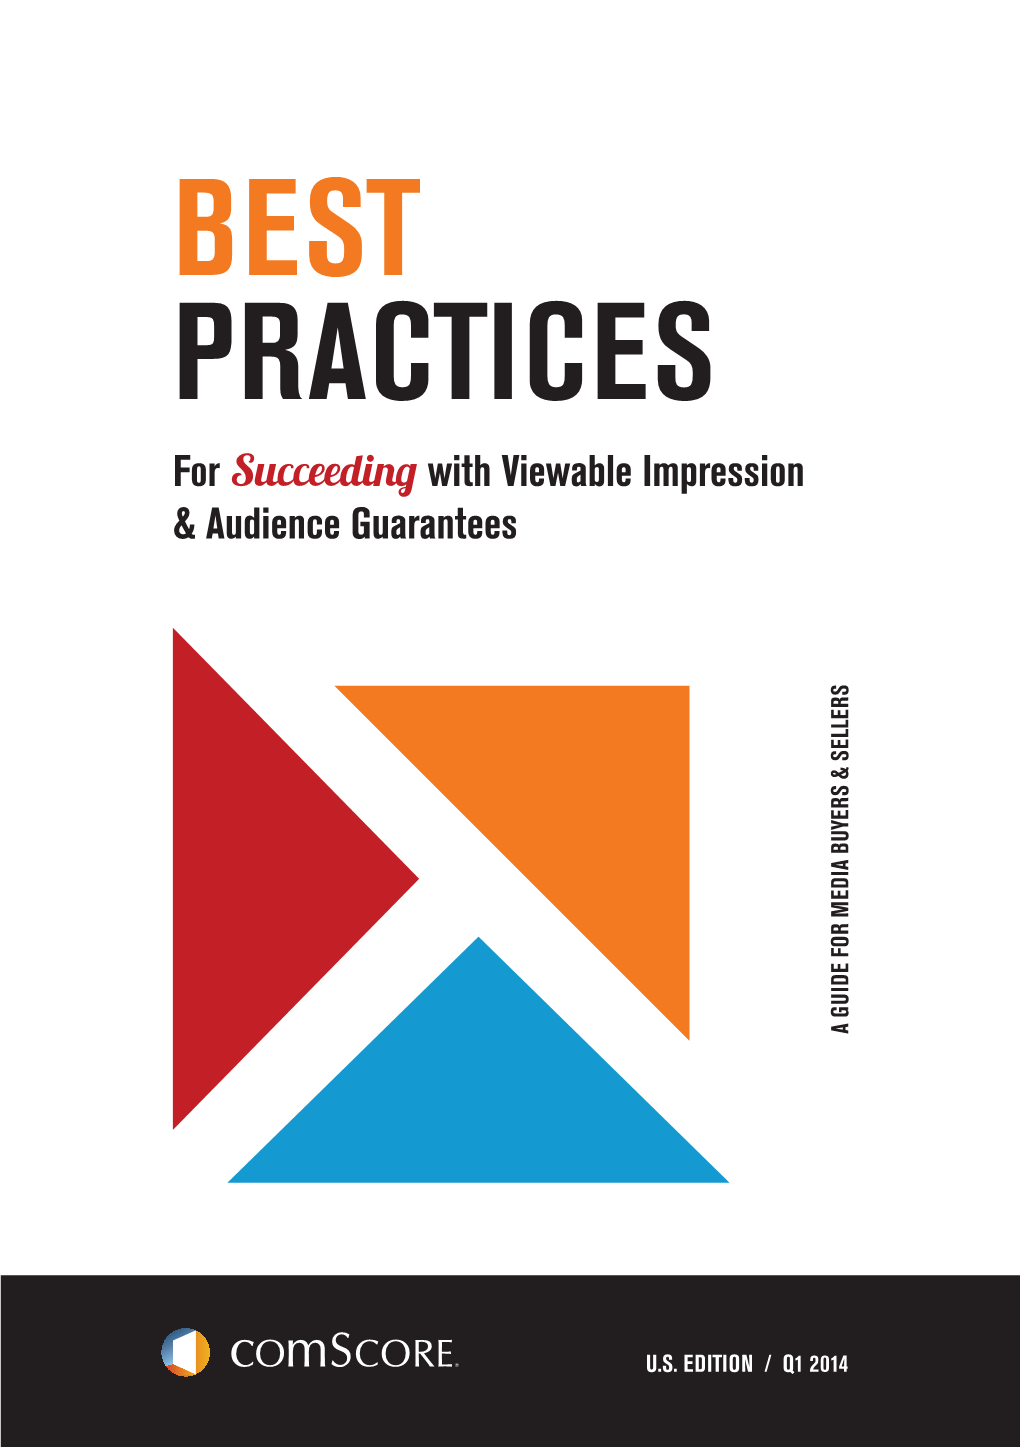 Viewable Impression Best Practices for Media